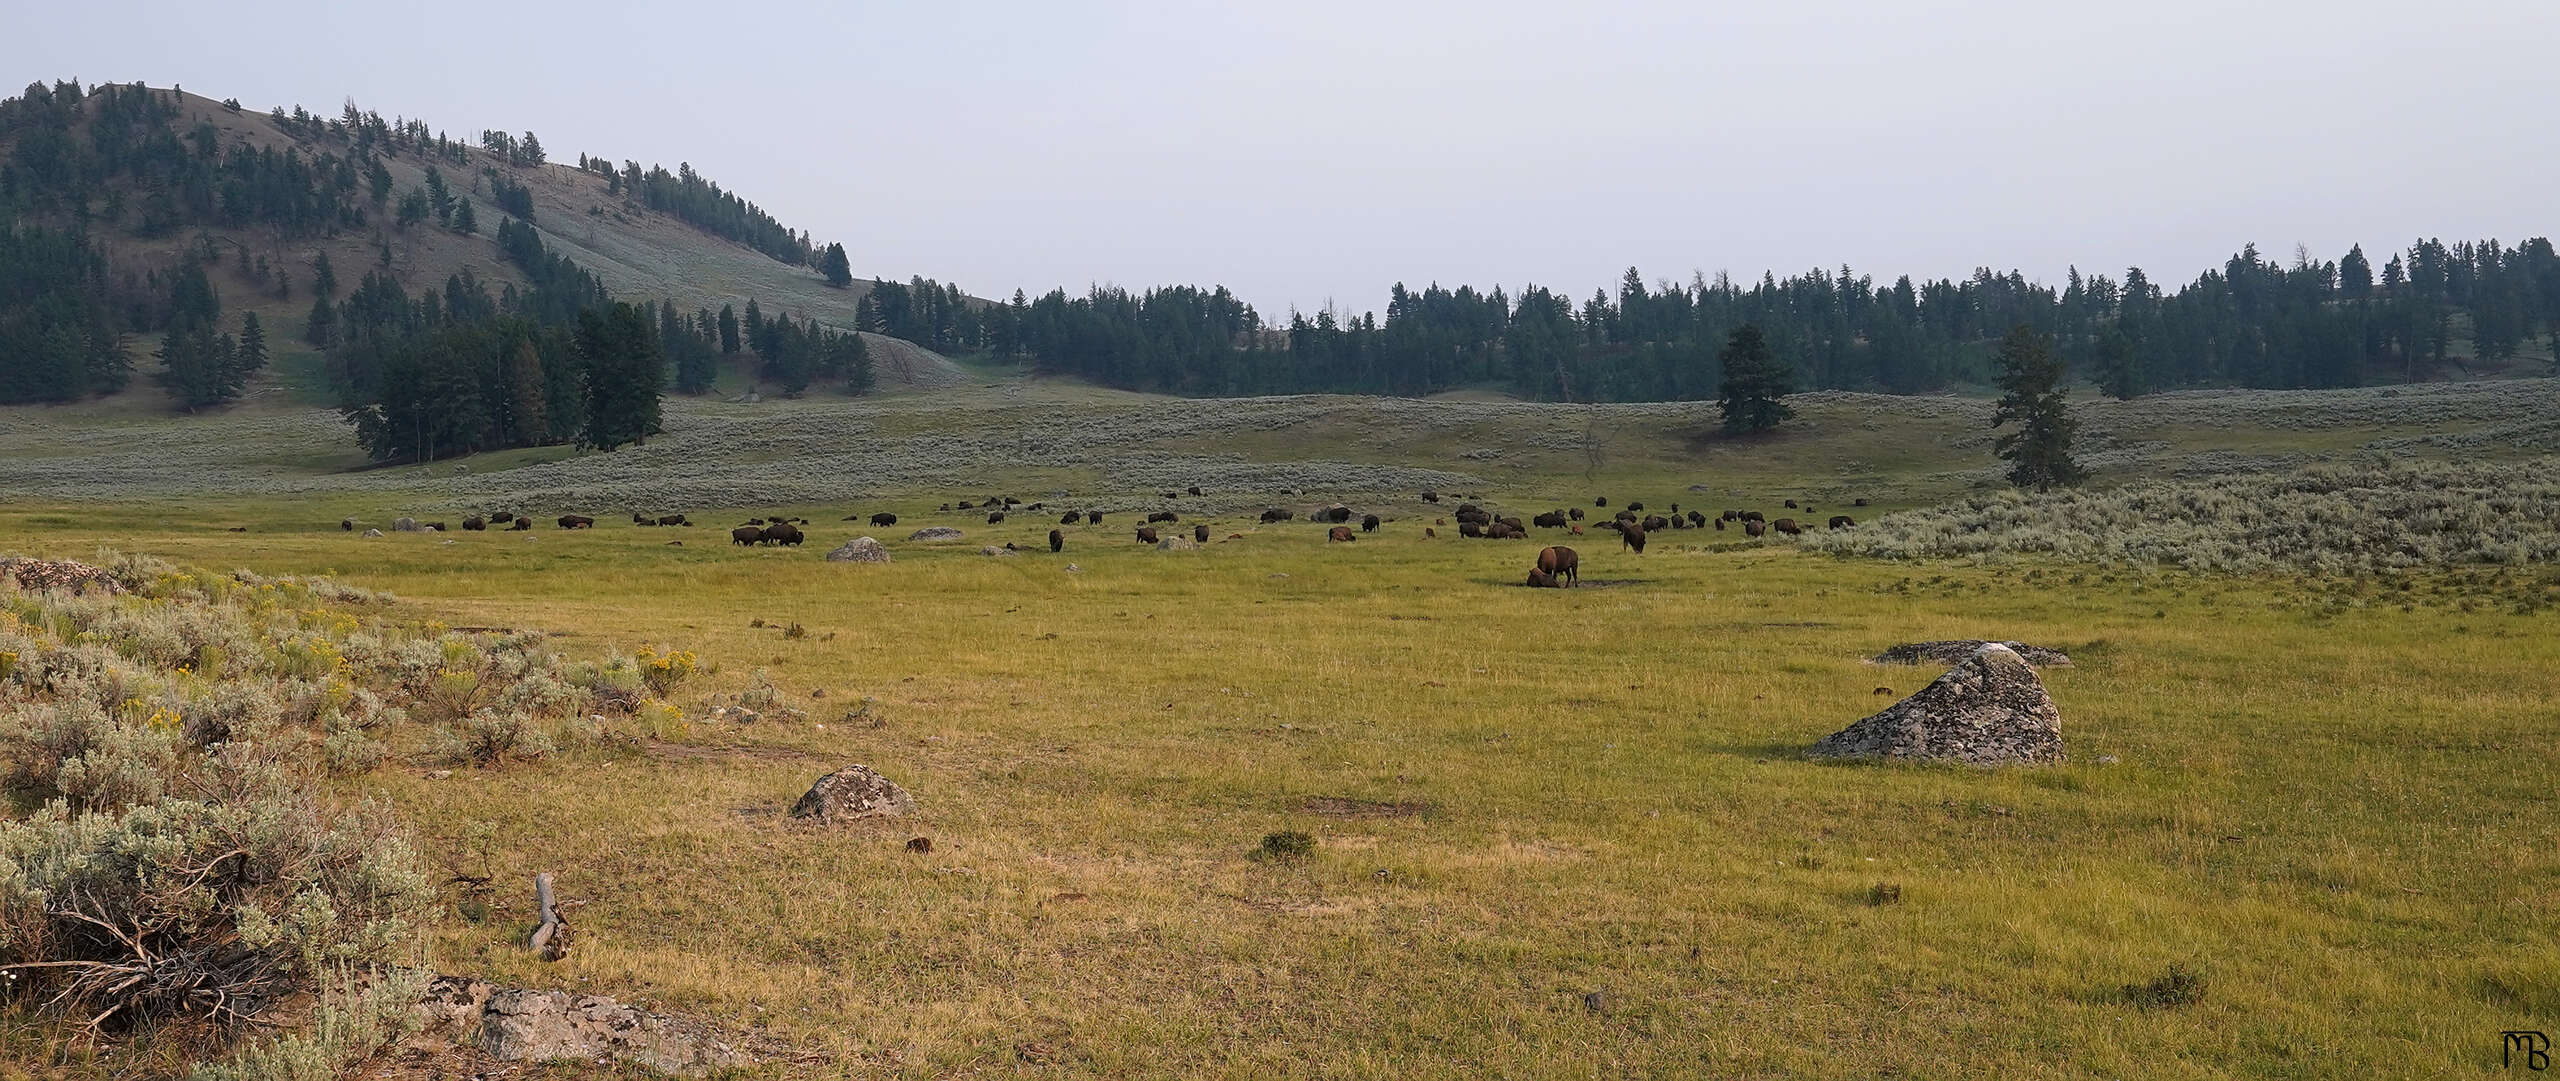 A field of bison in the sunset